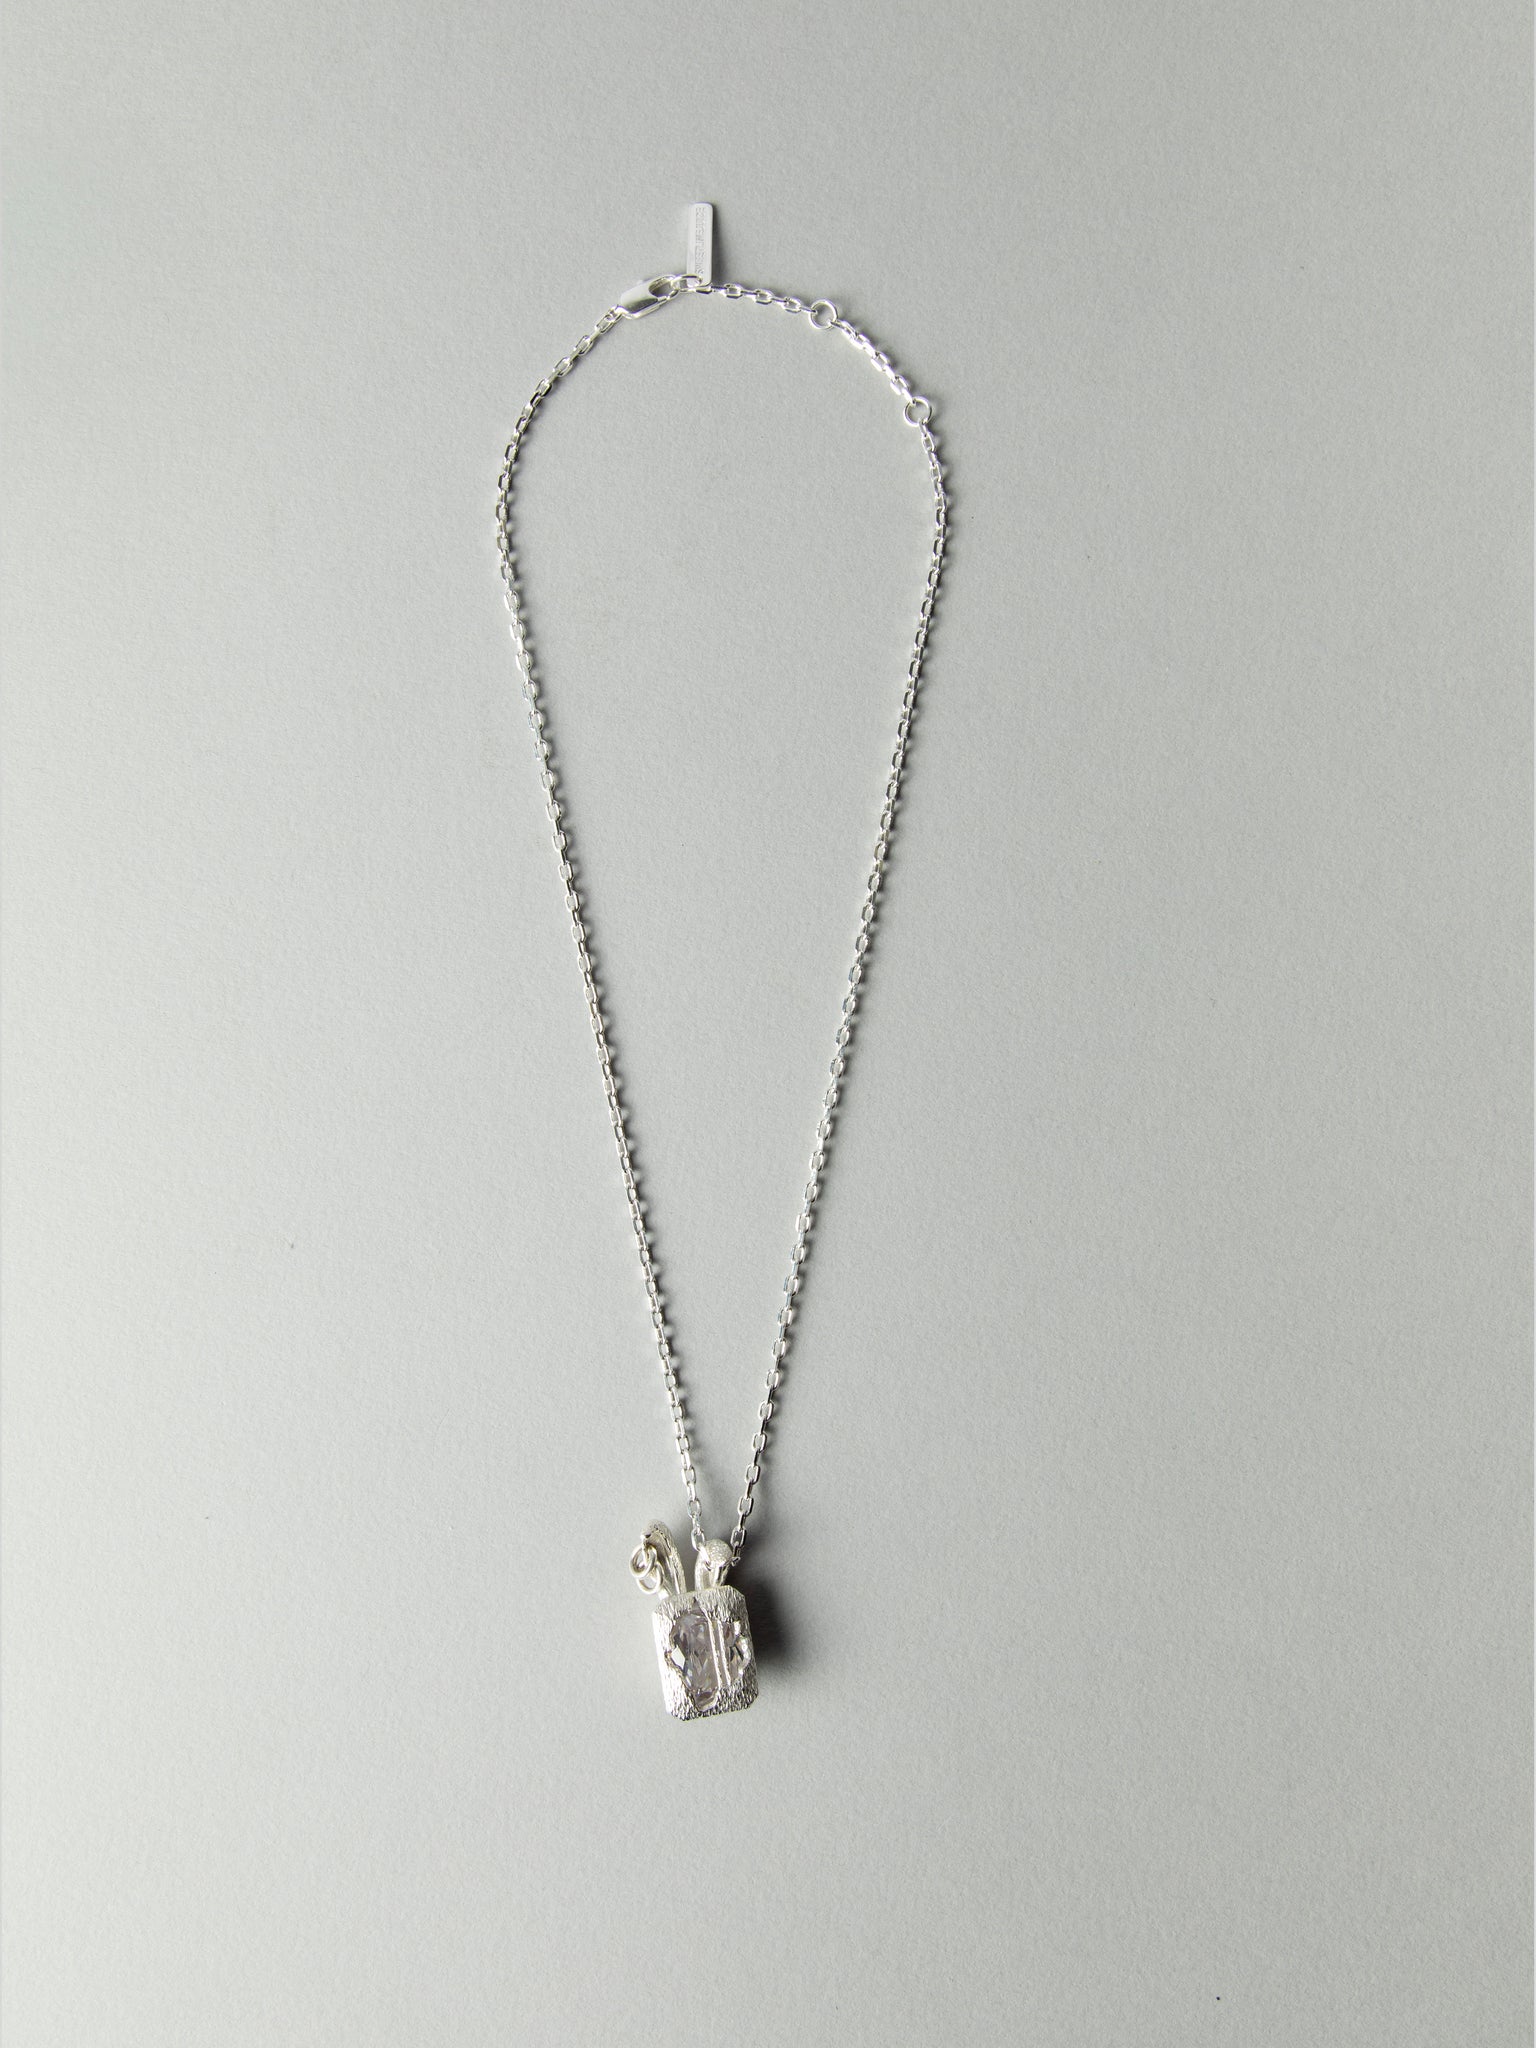 Wild Hare Bunny Pendant Necklace Clear Stone 